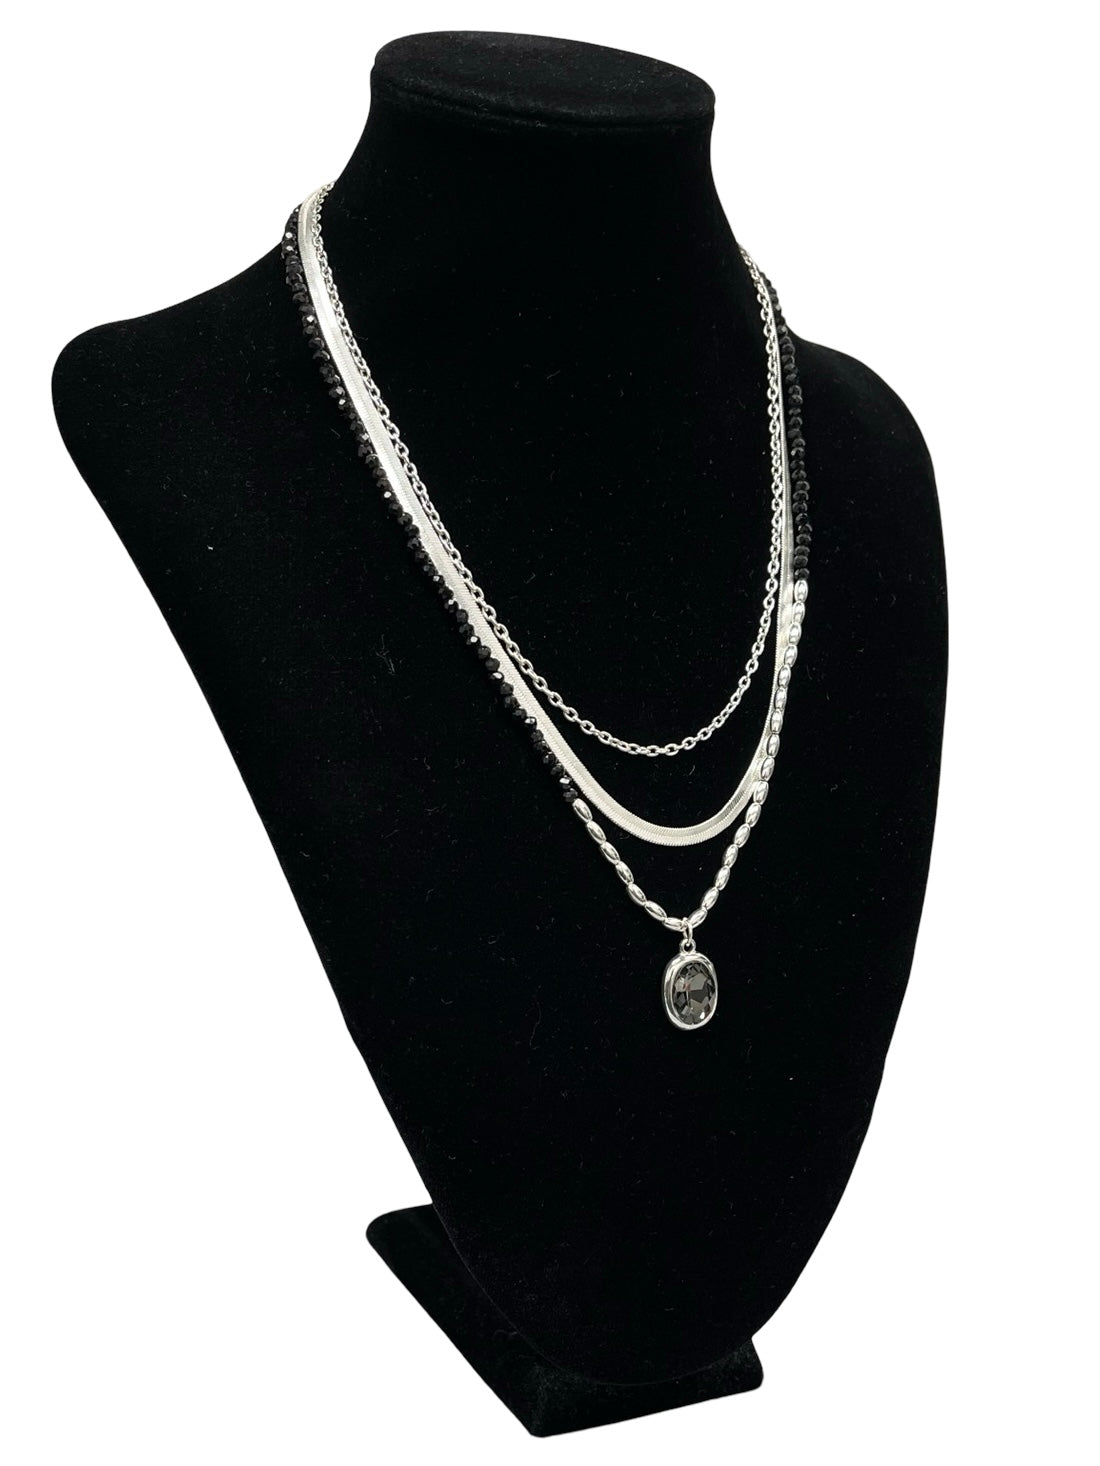 Silver & Black Layered Necklace